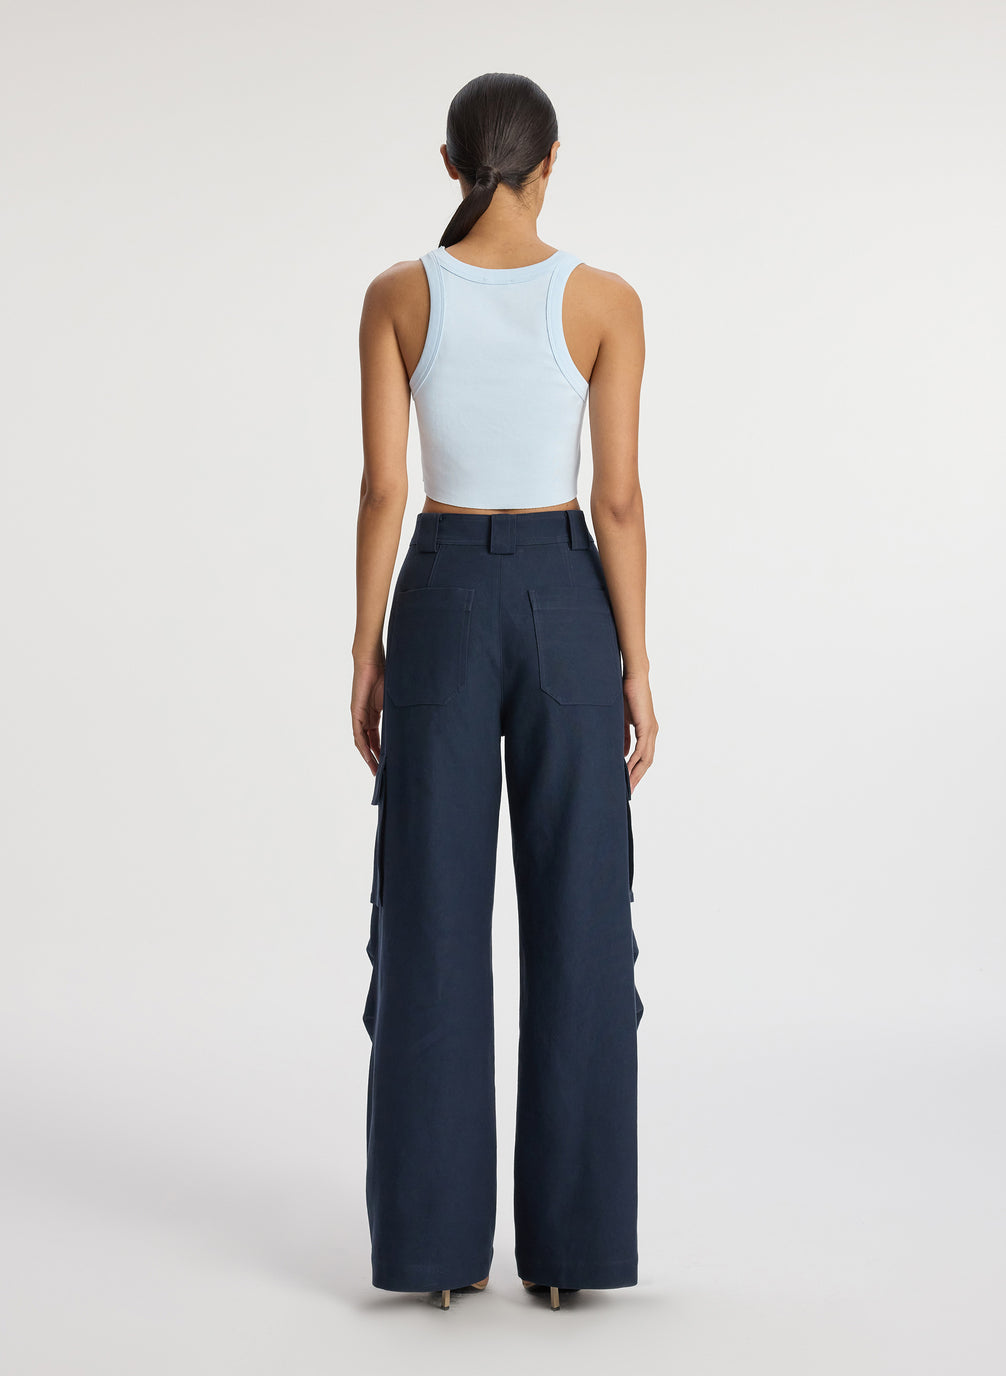 back view of woman wearing light blue cropped rib tank top and navy blue cargo pants